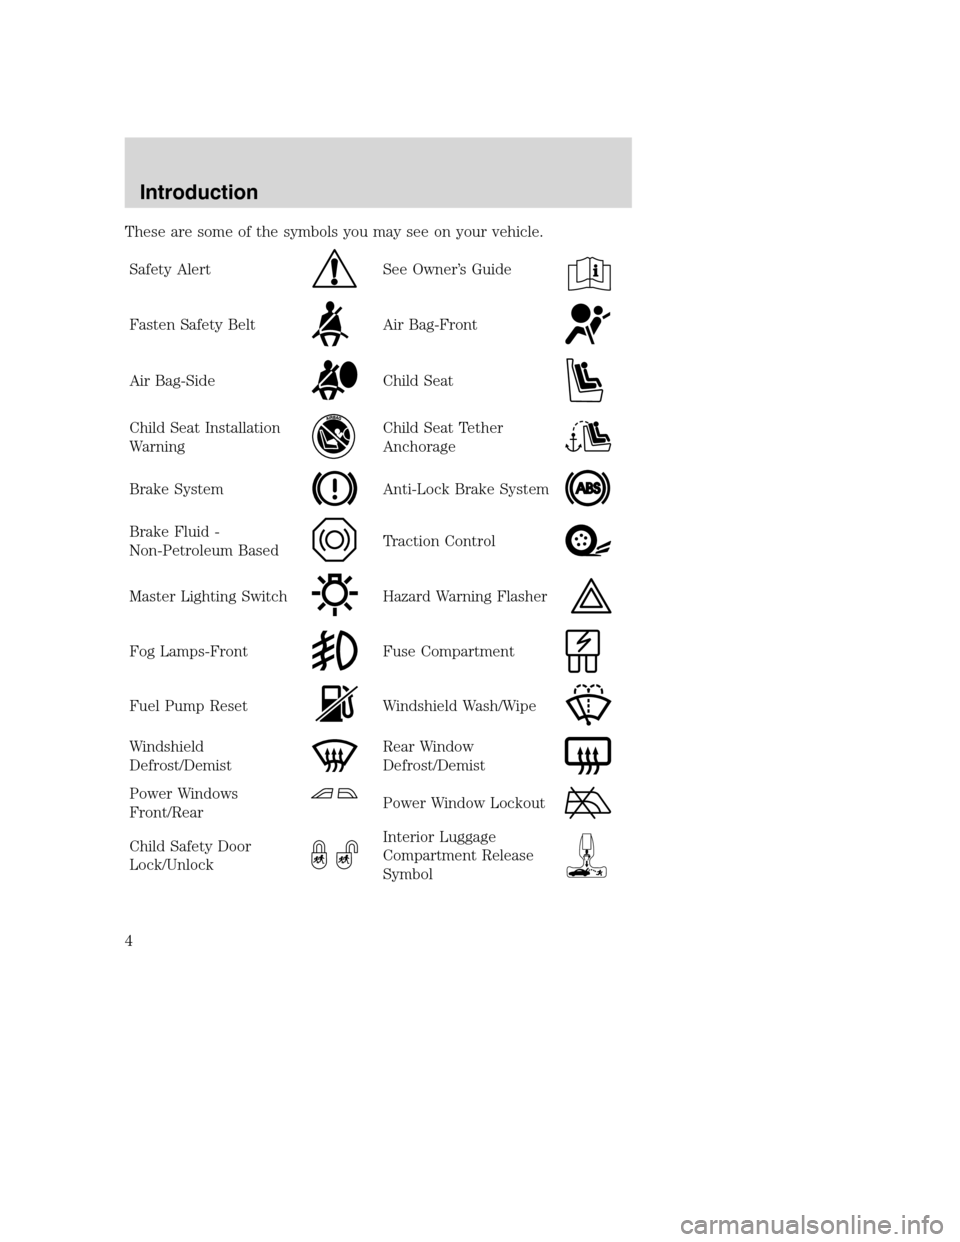 FORD F SERIES MOTORHOME AND COMMERCIAL CHASSIS 2001 10.G Owners Manual These are some of the symbols you may see on your vehicle.
Safety Alert
See Owner’s Guide
Fasten Safety BeltAir Bag-Front
Air Bag-SideChild Seat
Child Seat Installation
WarningChild Seat Tether
Anch